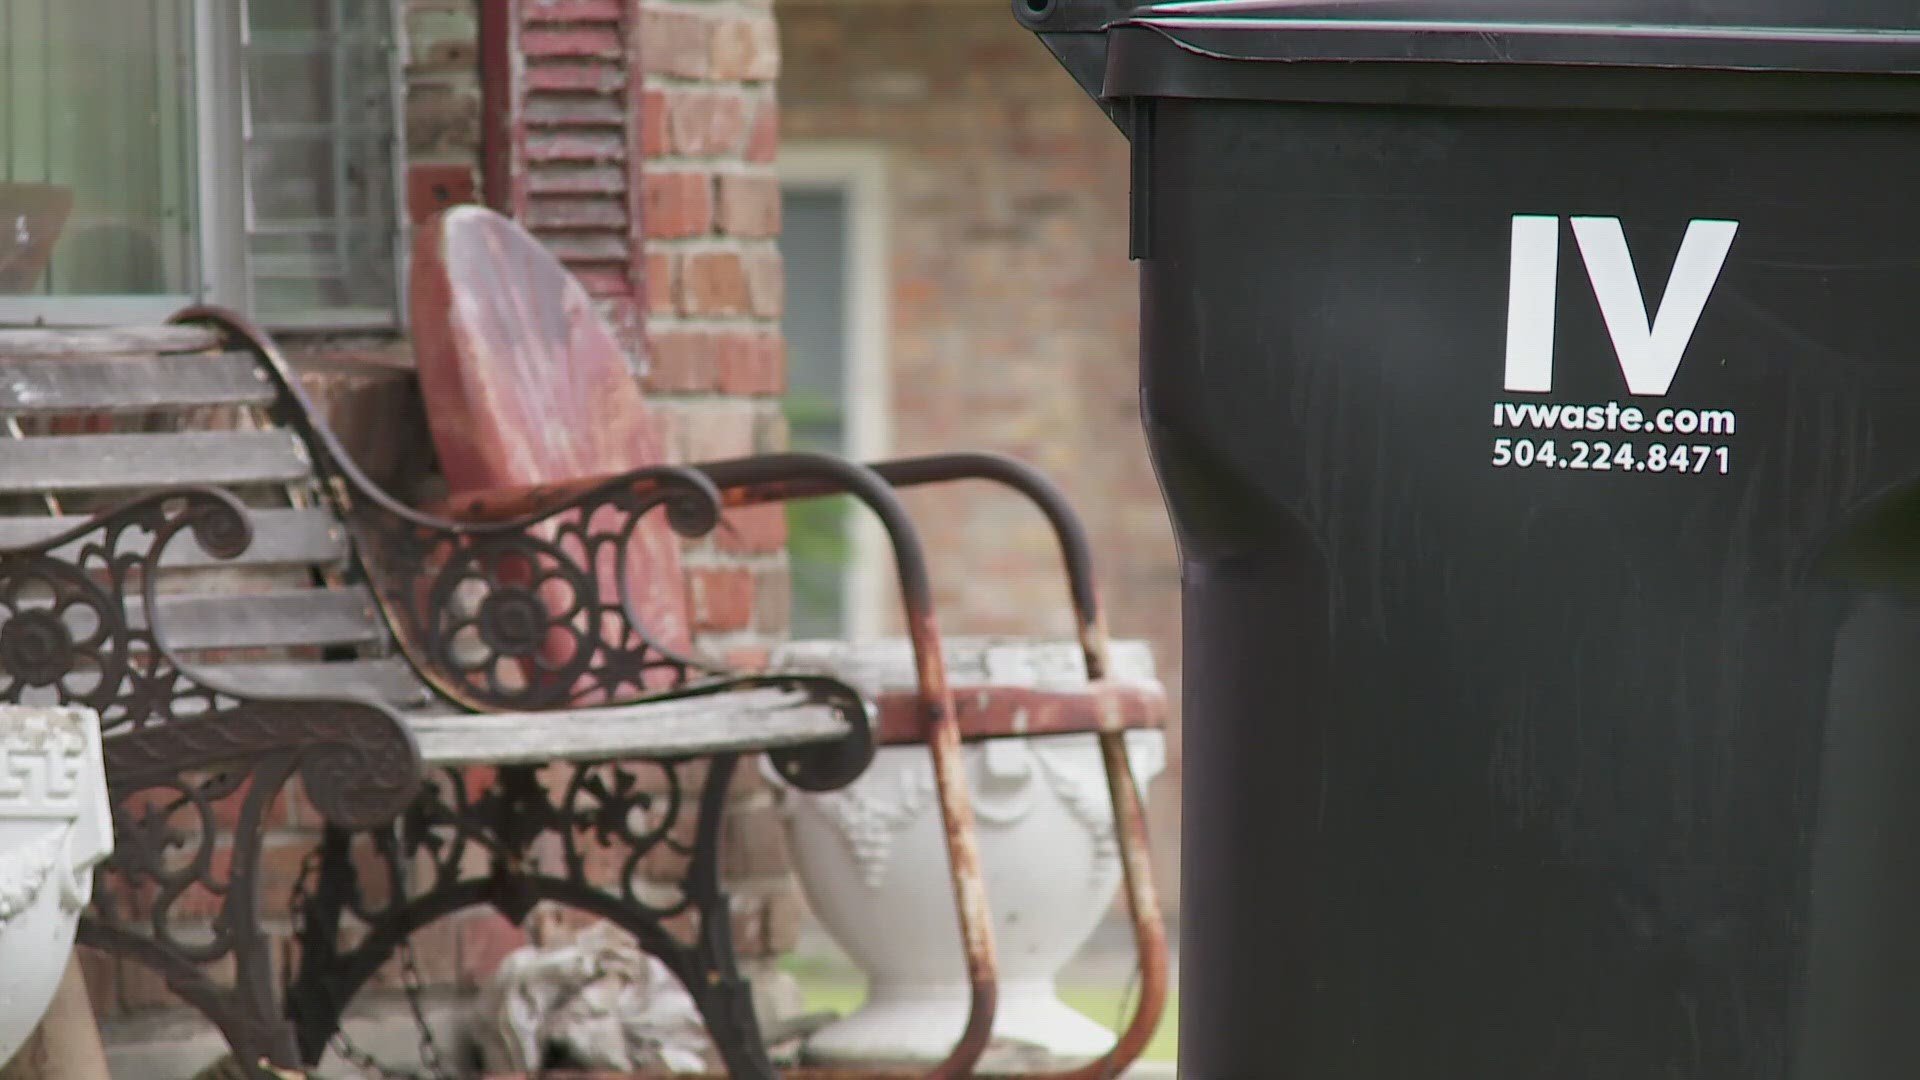 IV Waste is adding Uptown, Mid-City and parts of Treme and Carrollton to its trash collection.